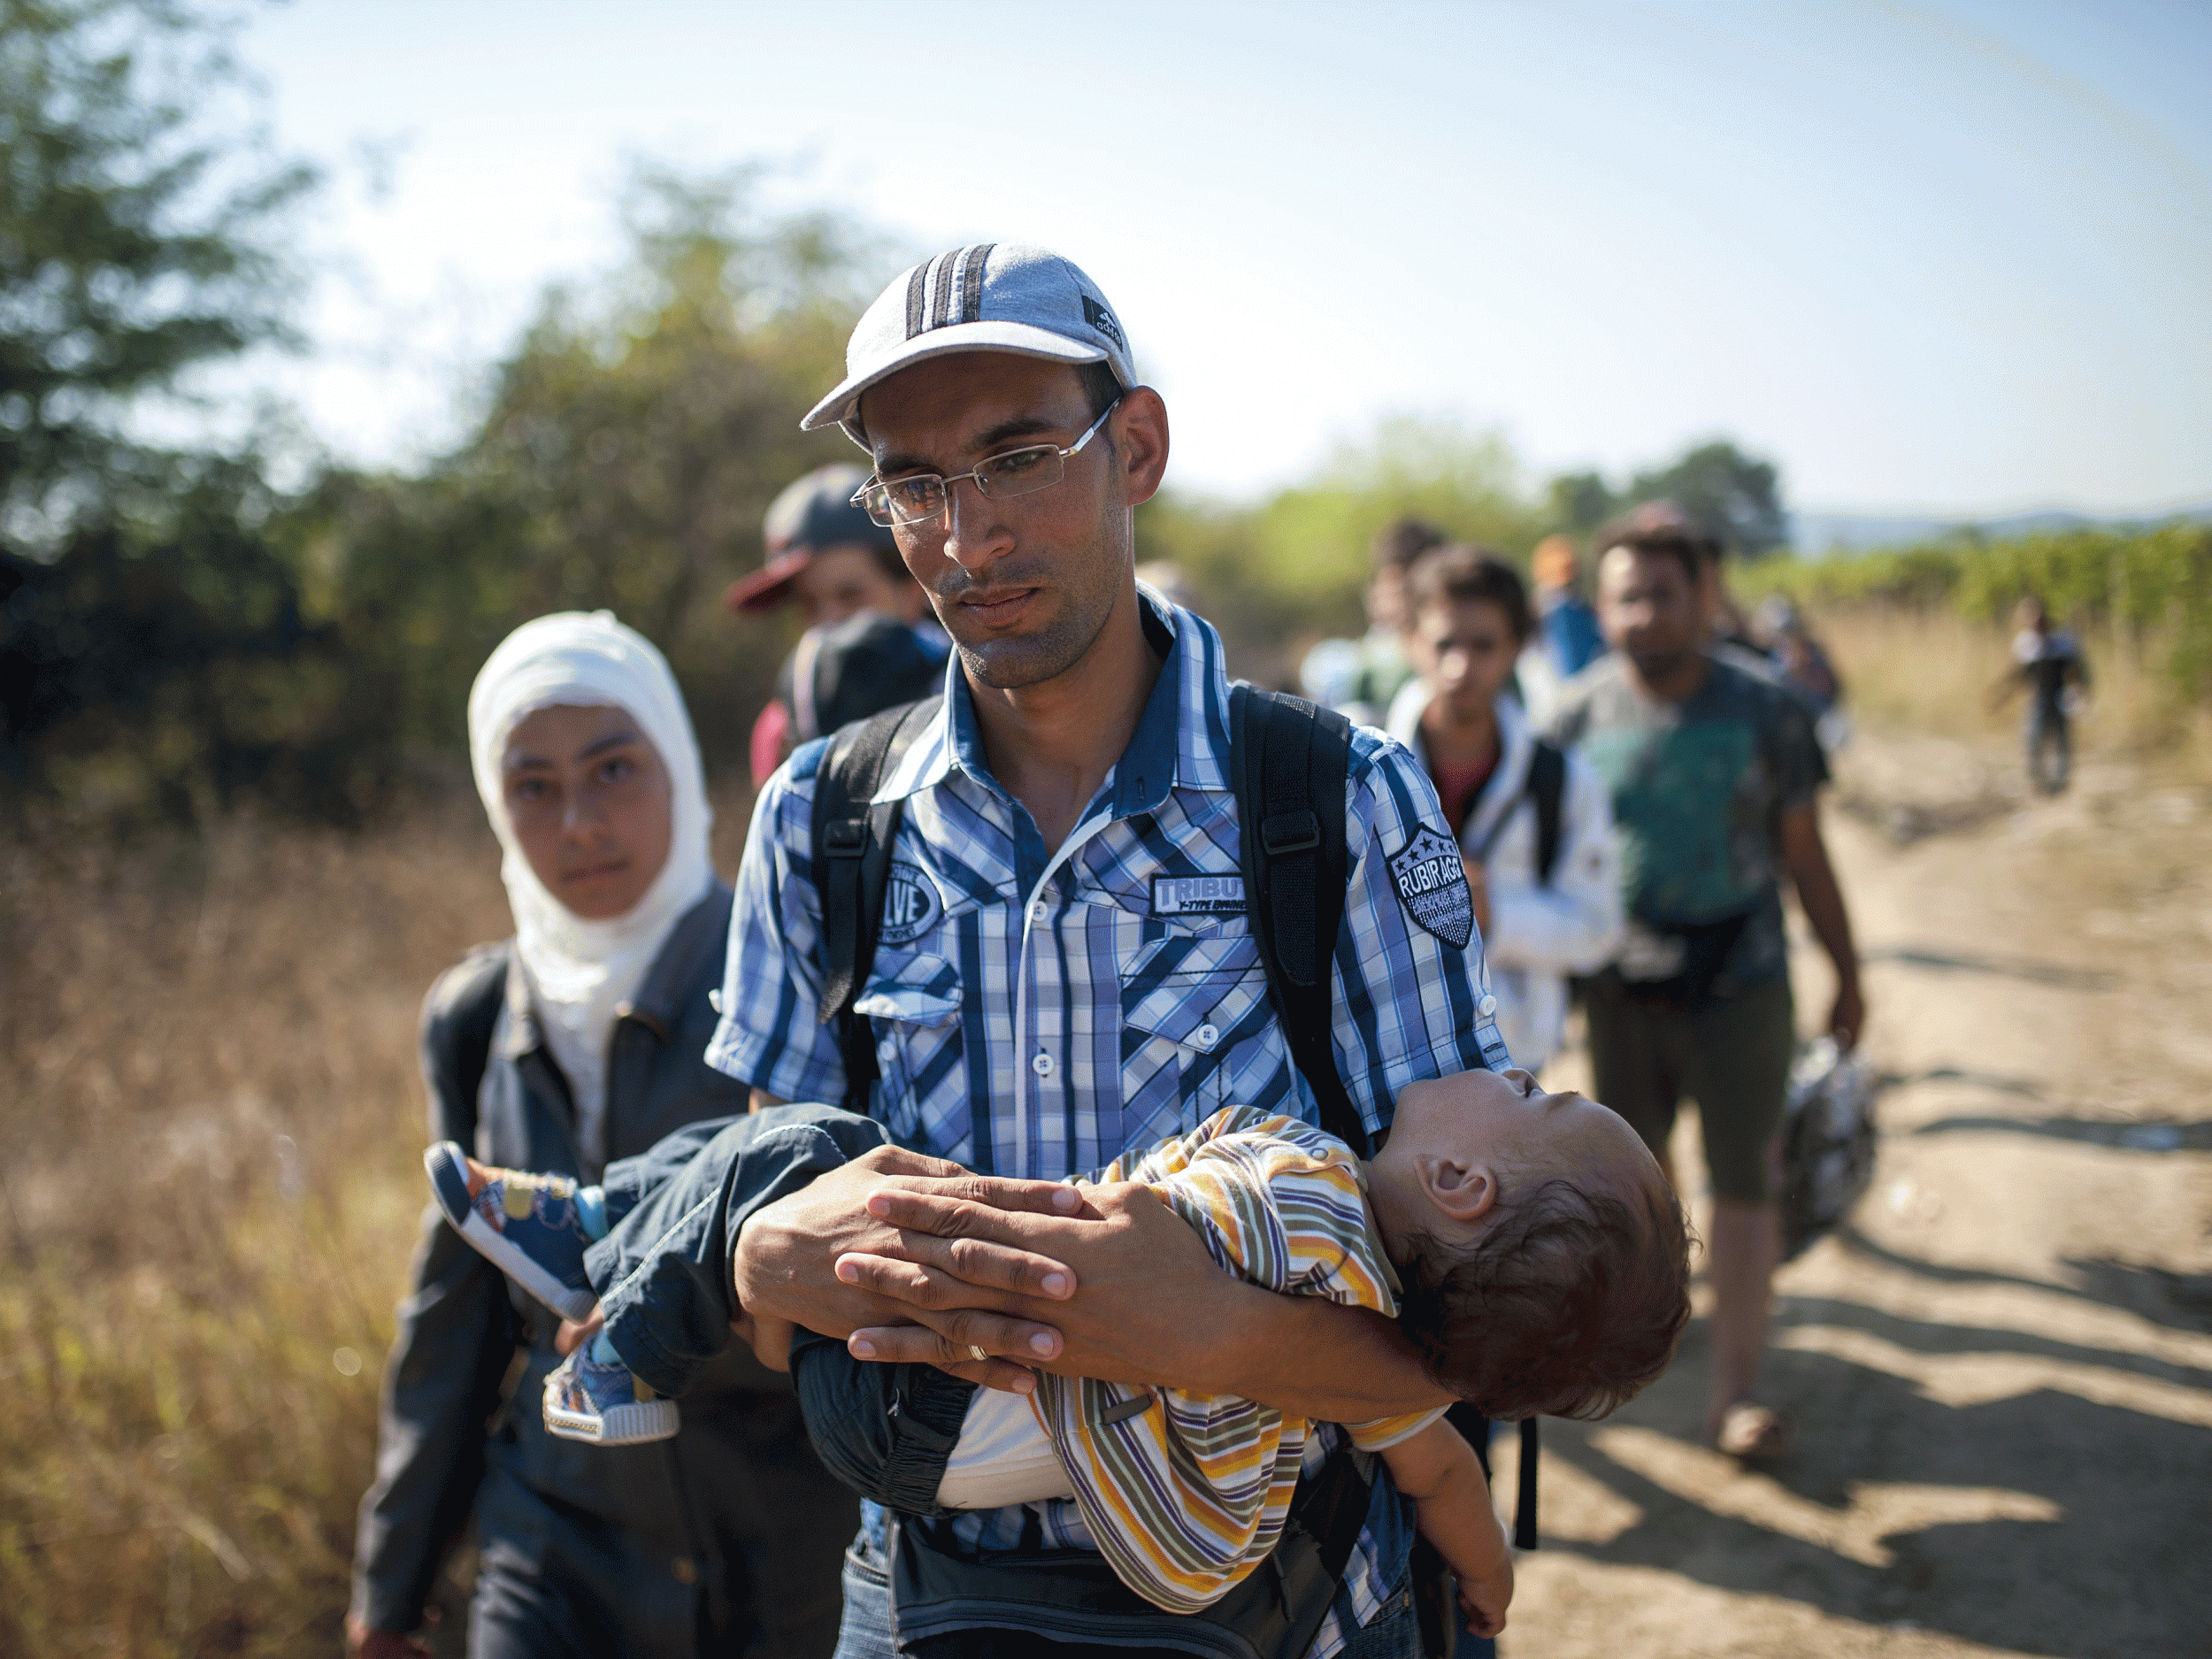 Baby carriers being donated to refugees from around the world